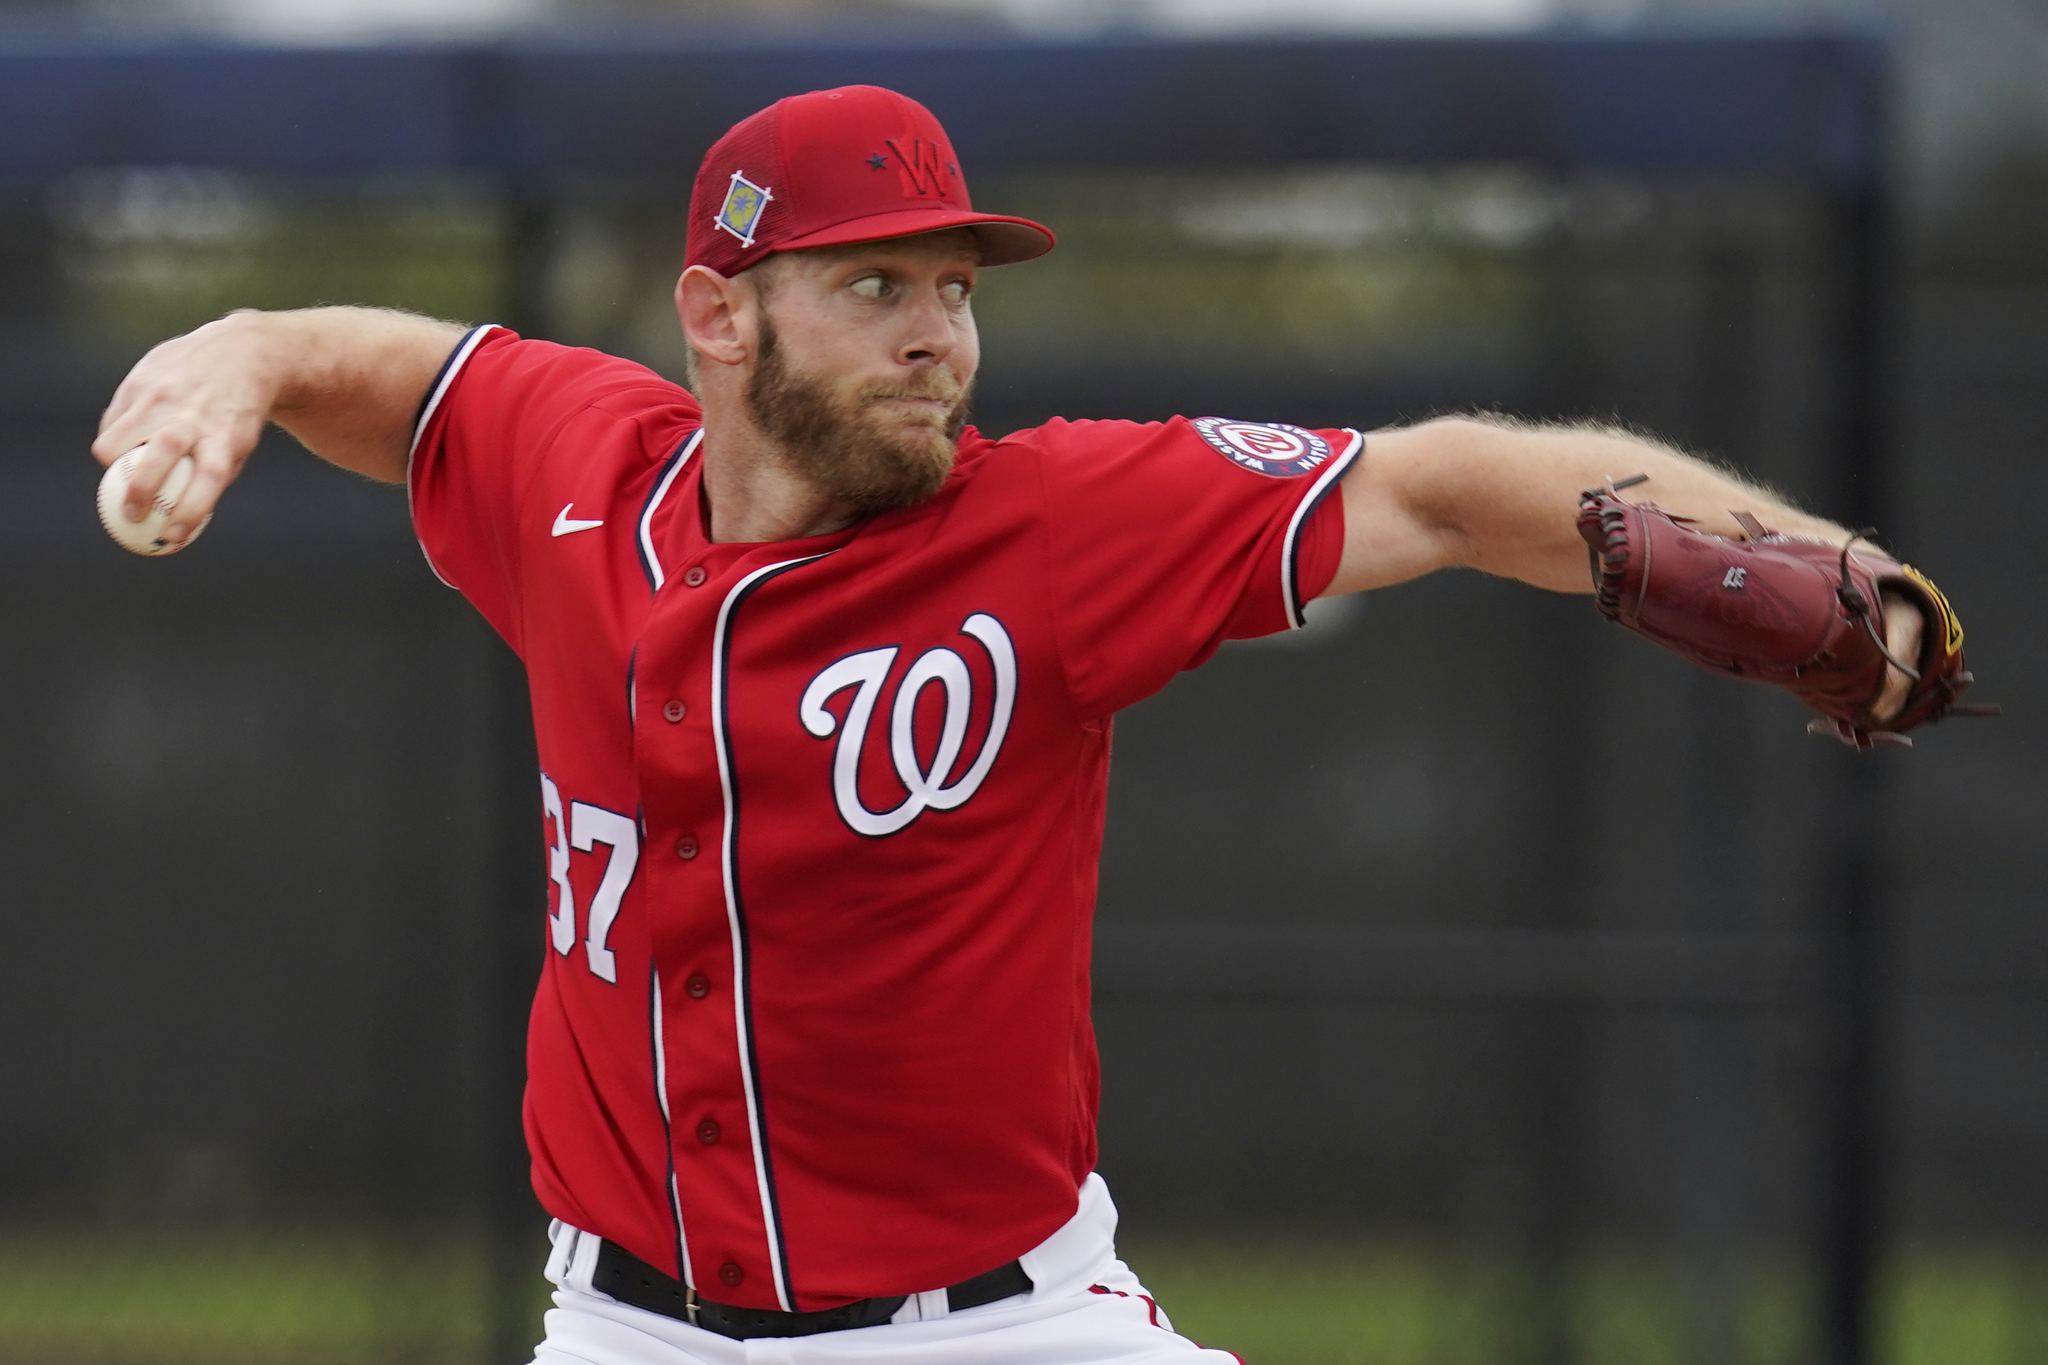 Pitcher Stephen Strasburg is set to retire according to a report from the Washington Post